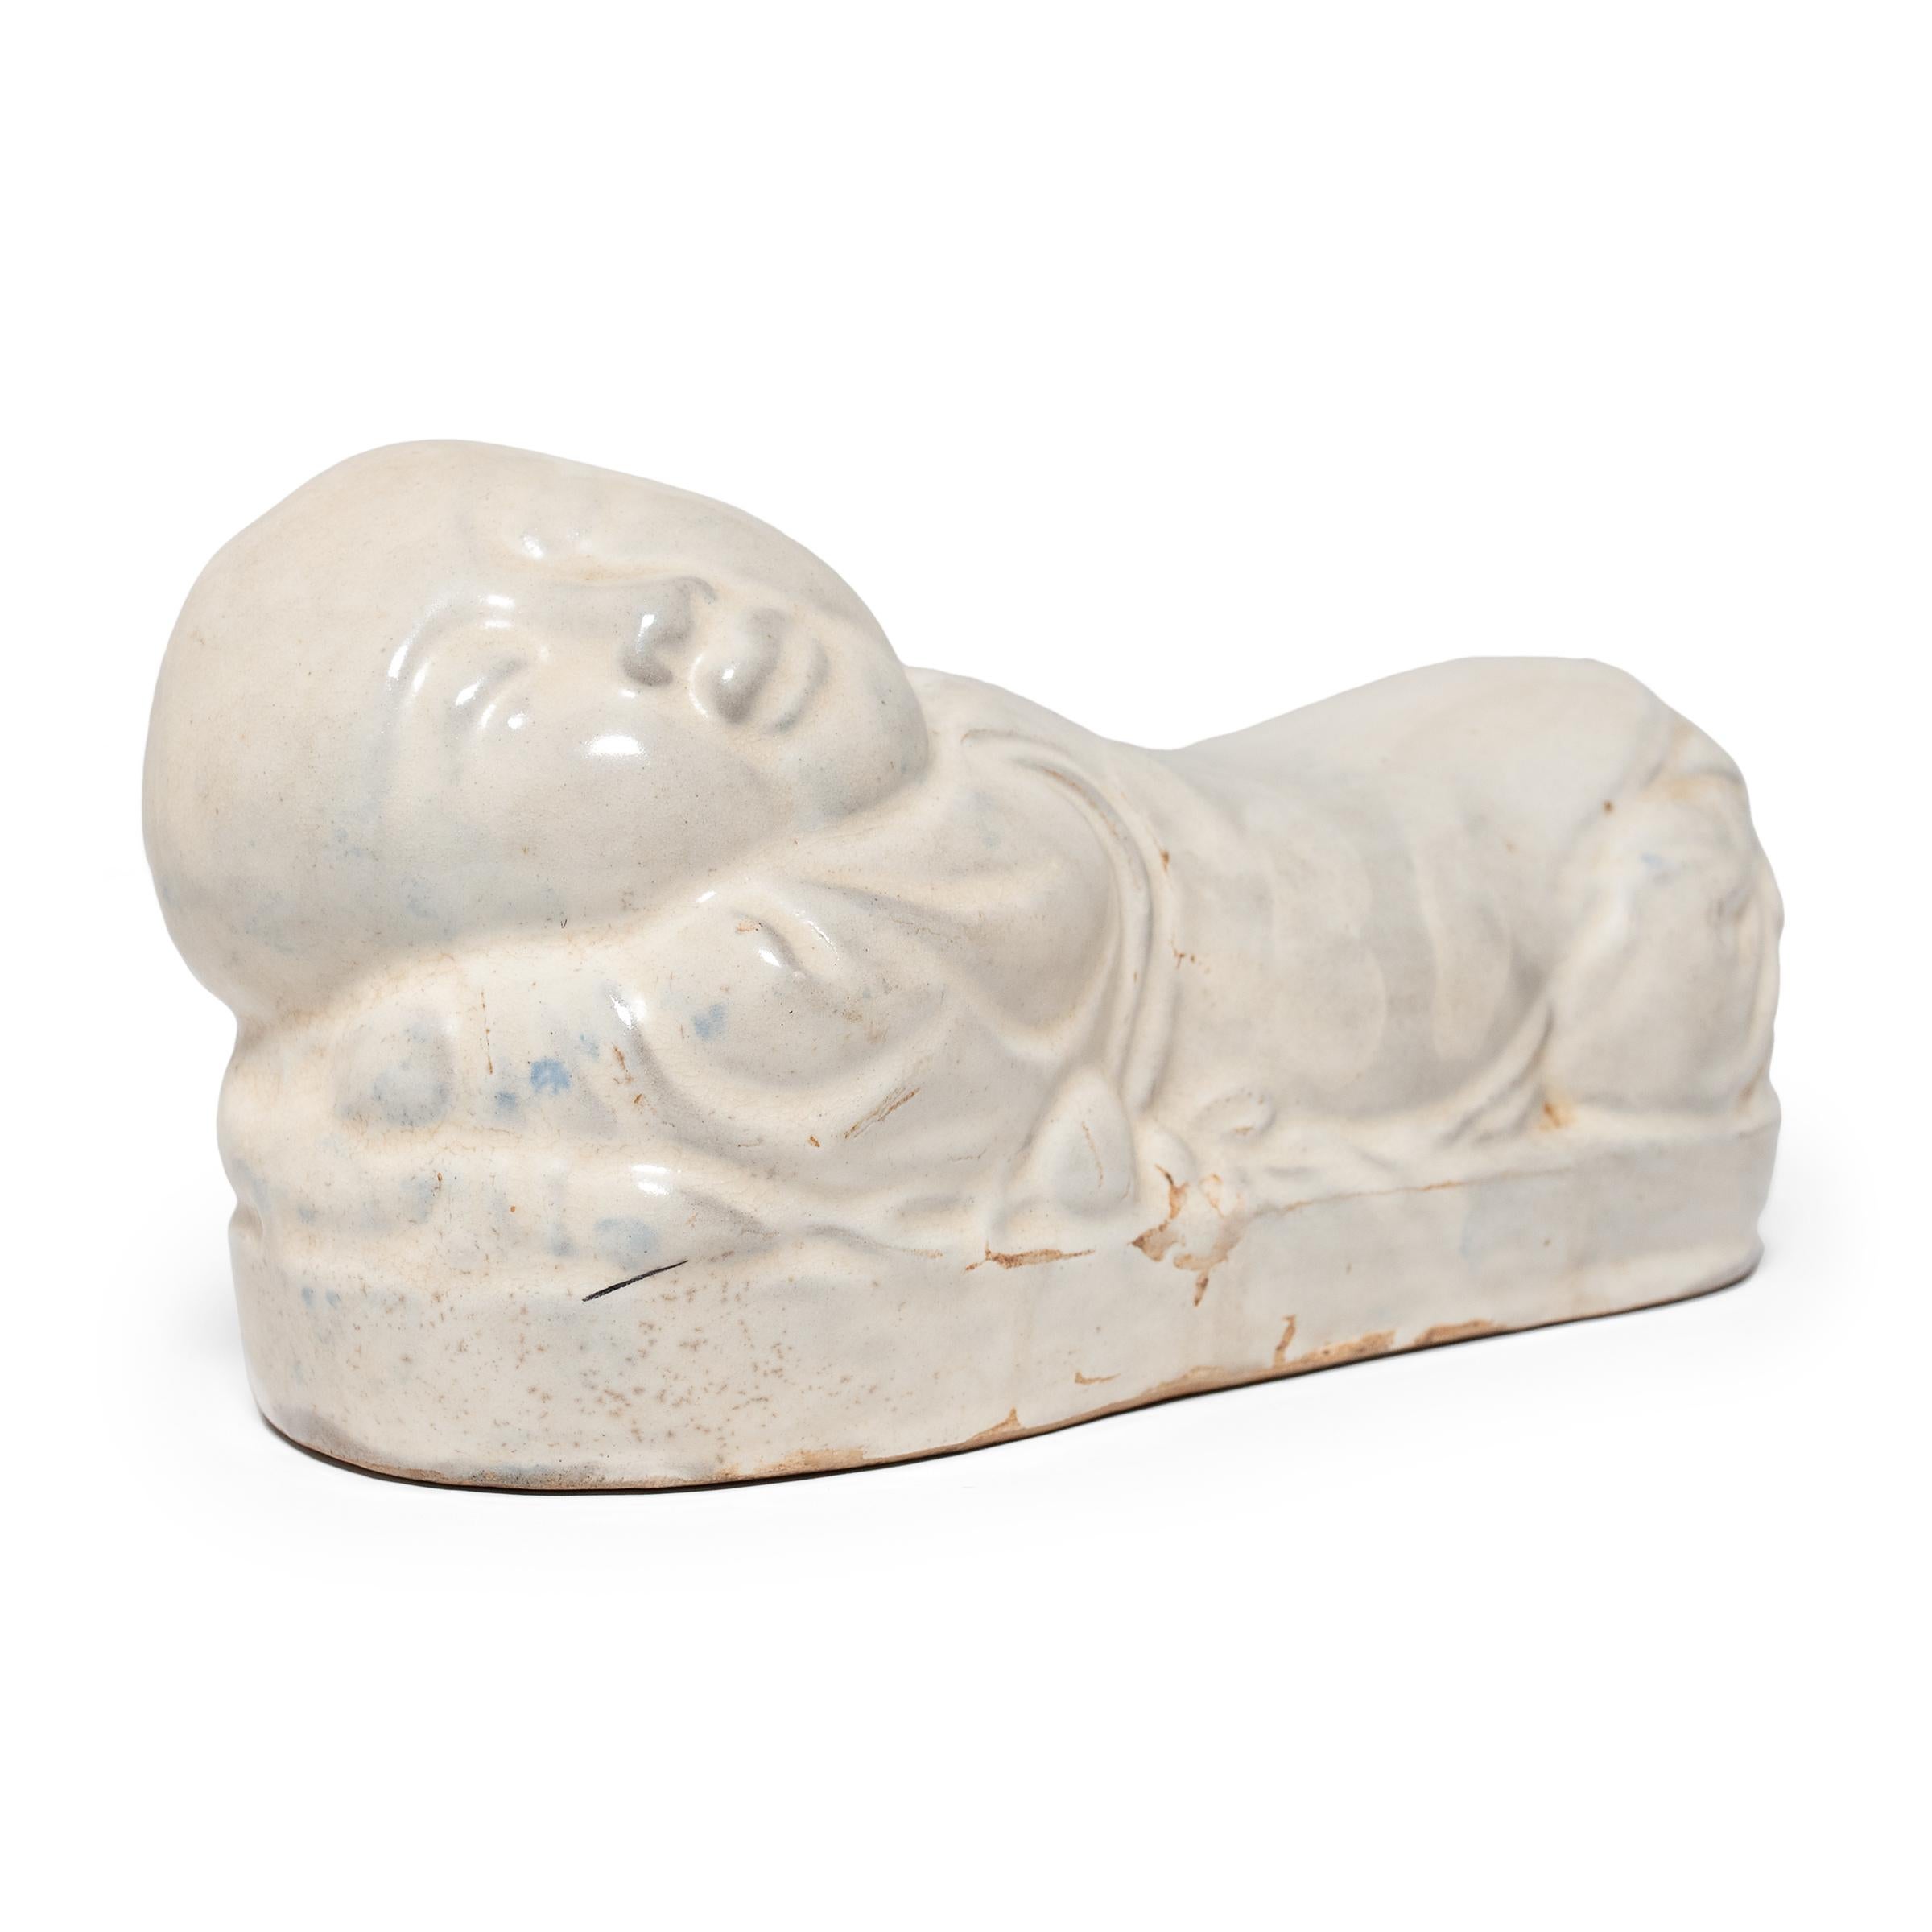 To keep her elaborate hairstyle intact while sleeping, a well-to-do Qing-dynasty woman once used this ceramic headrest as a pillow. This headrest is shaped in the form of a baby boy, a motif commonly termed 